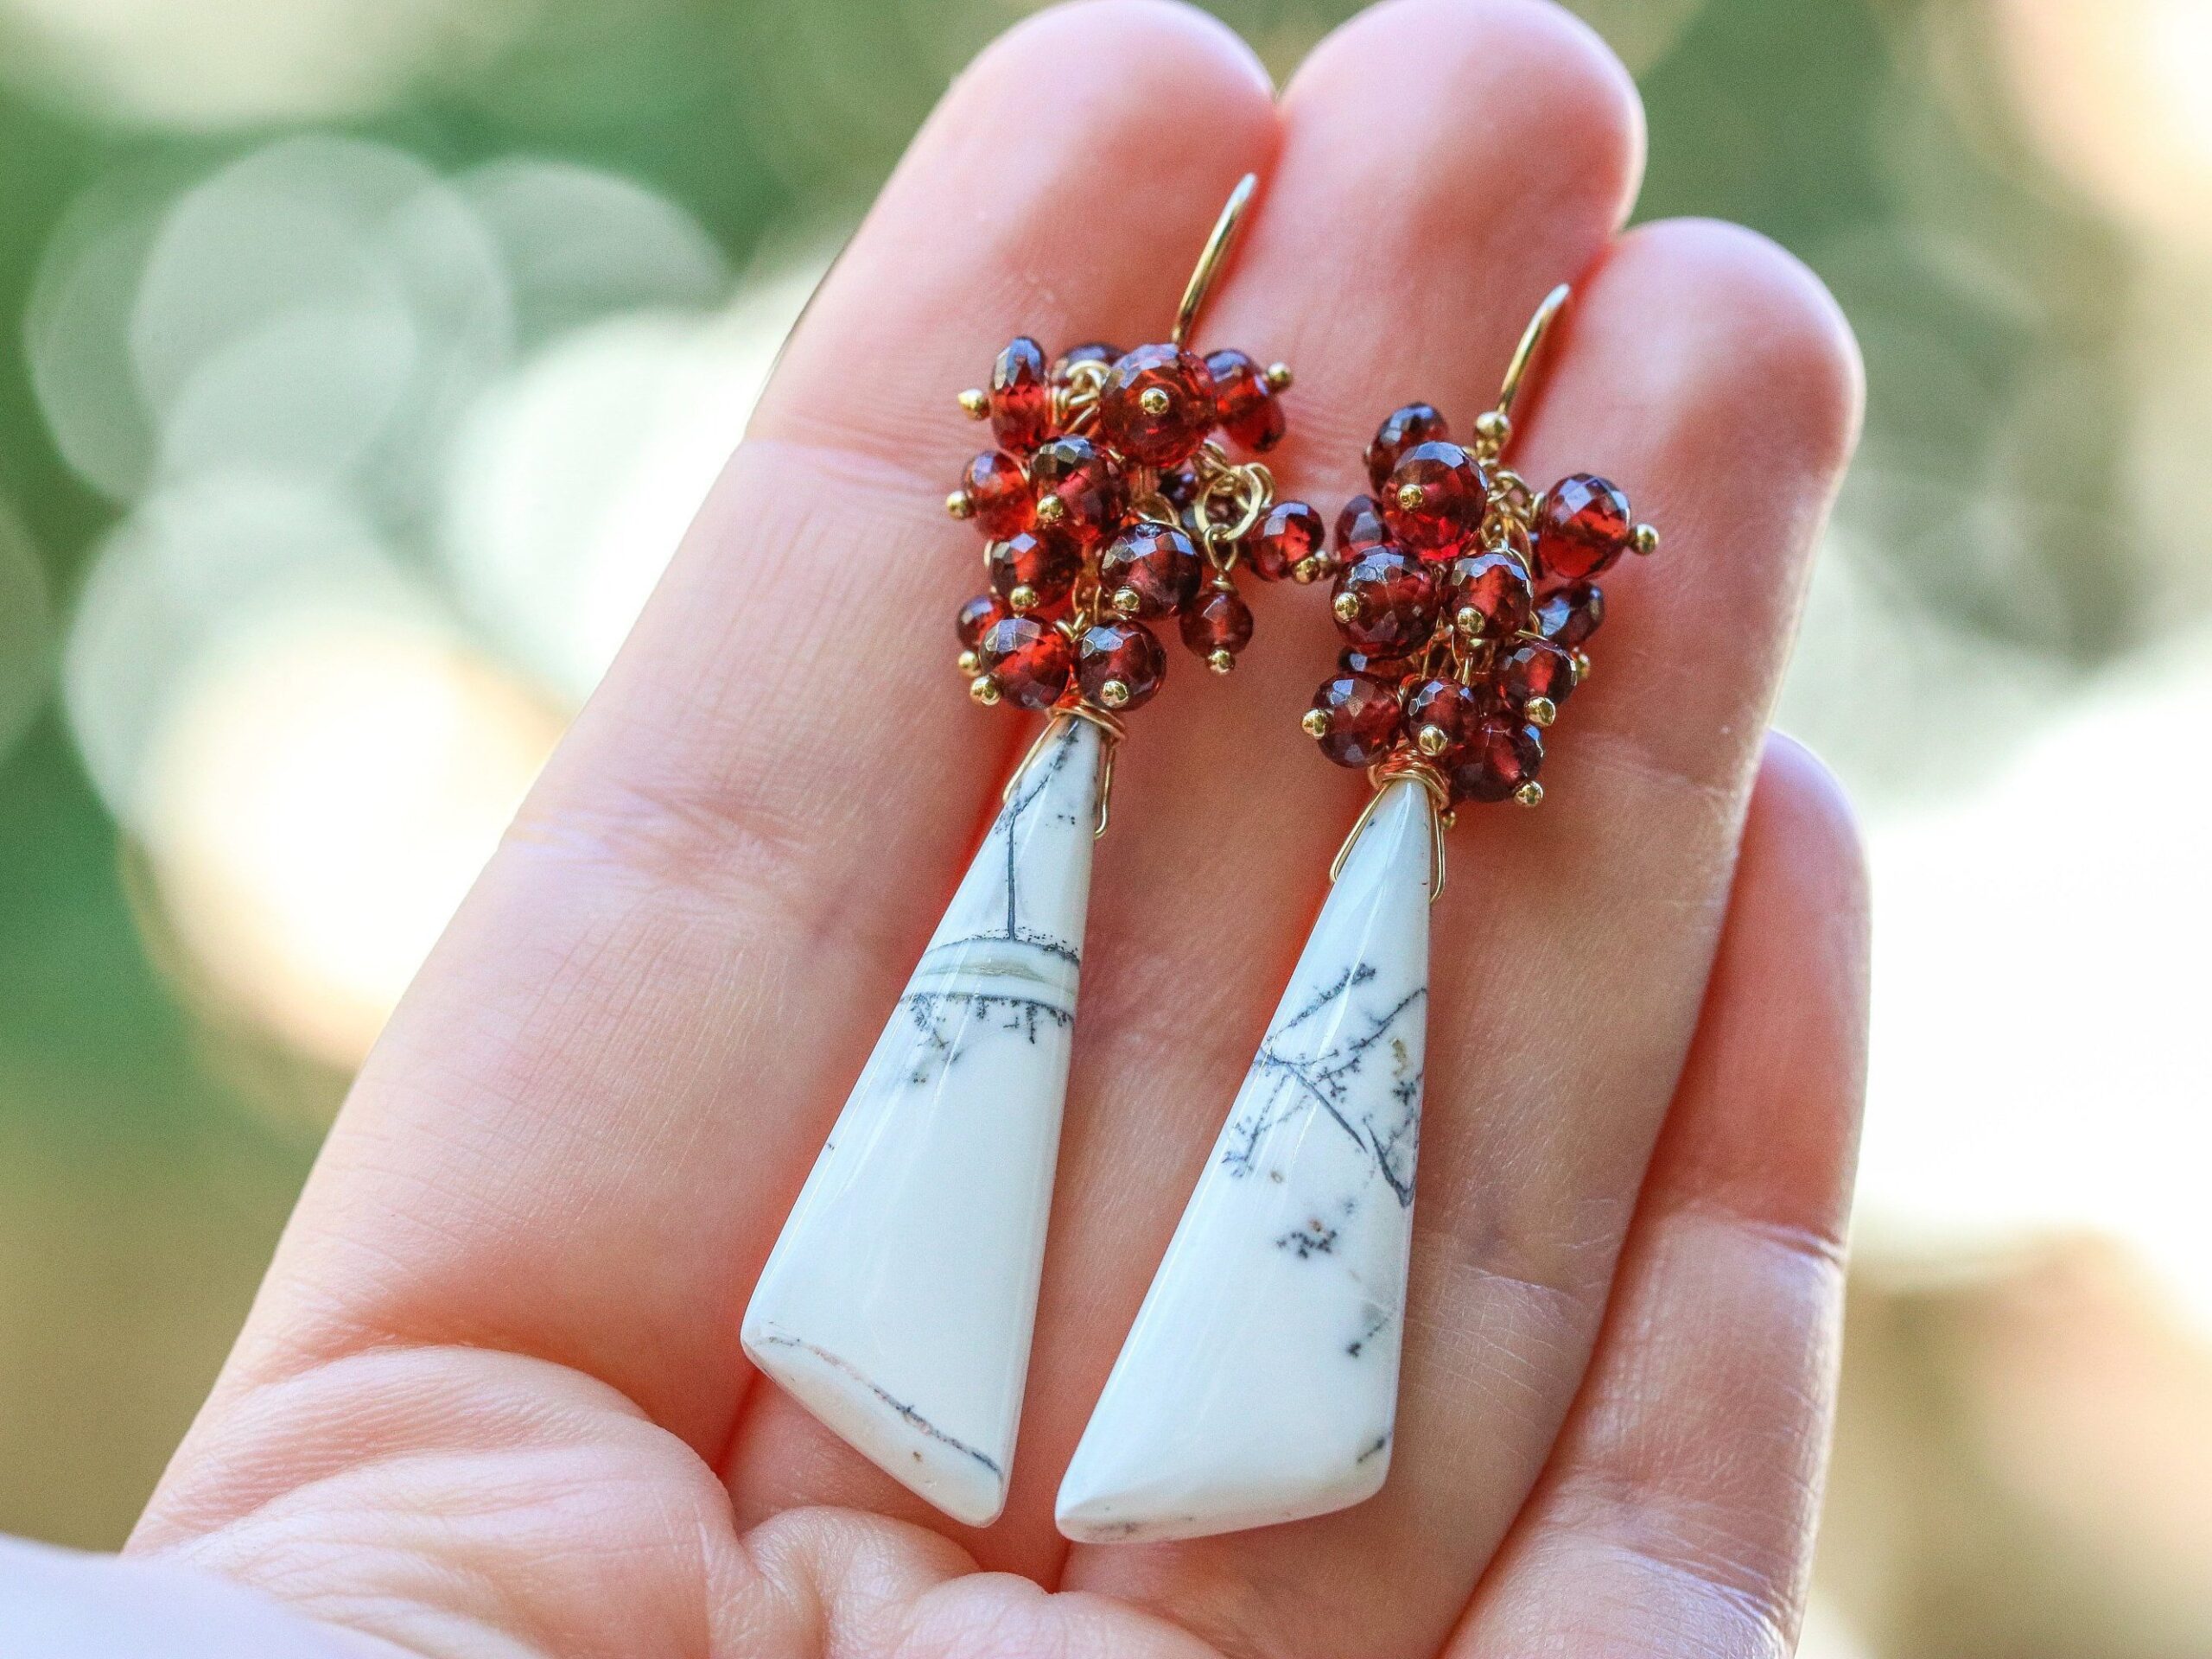 Red Garnet and Dendrite Opal Cluster Earrings in Gold, One of a Kind